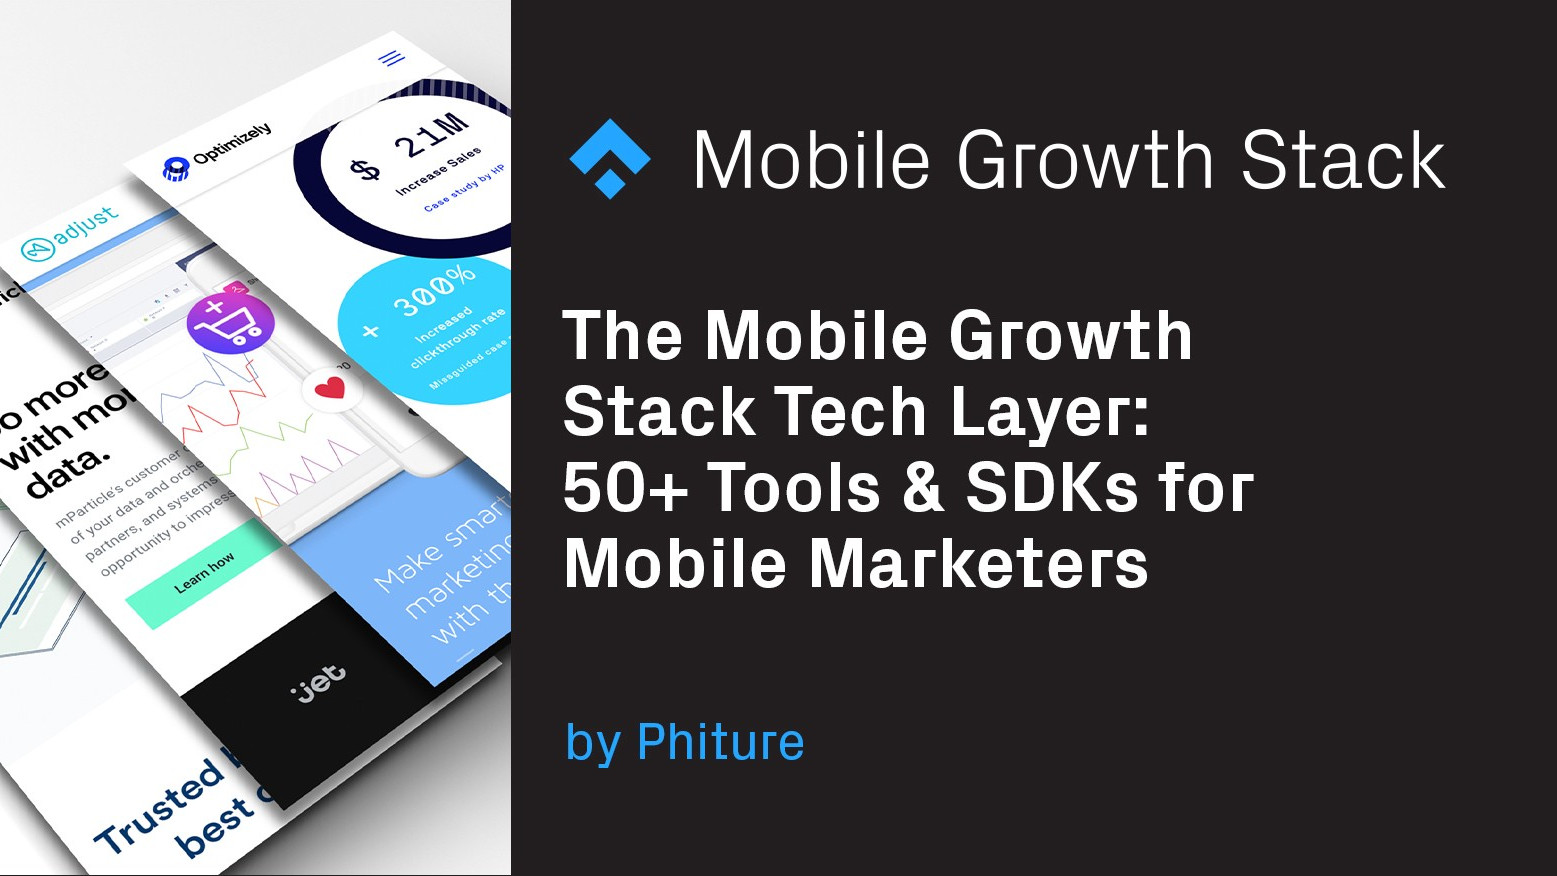 The Mobile Growth Stack Tech Layer: 50+ Tools & SDKs for Mobile Marketers